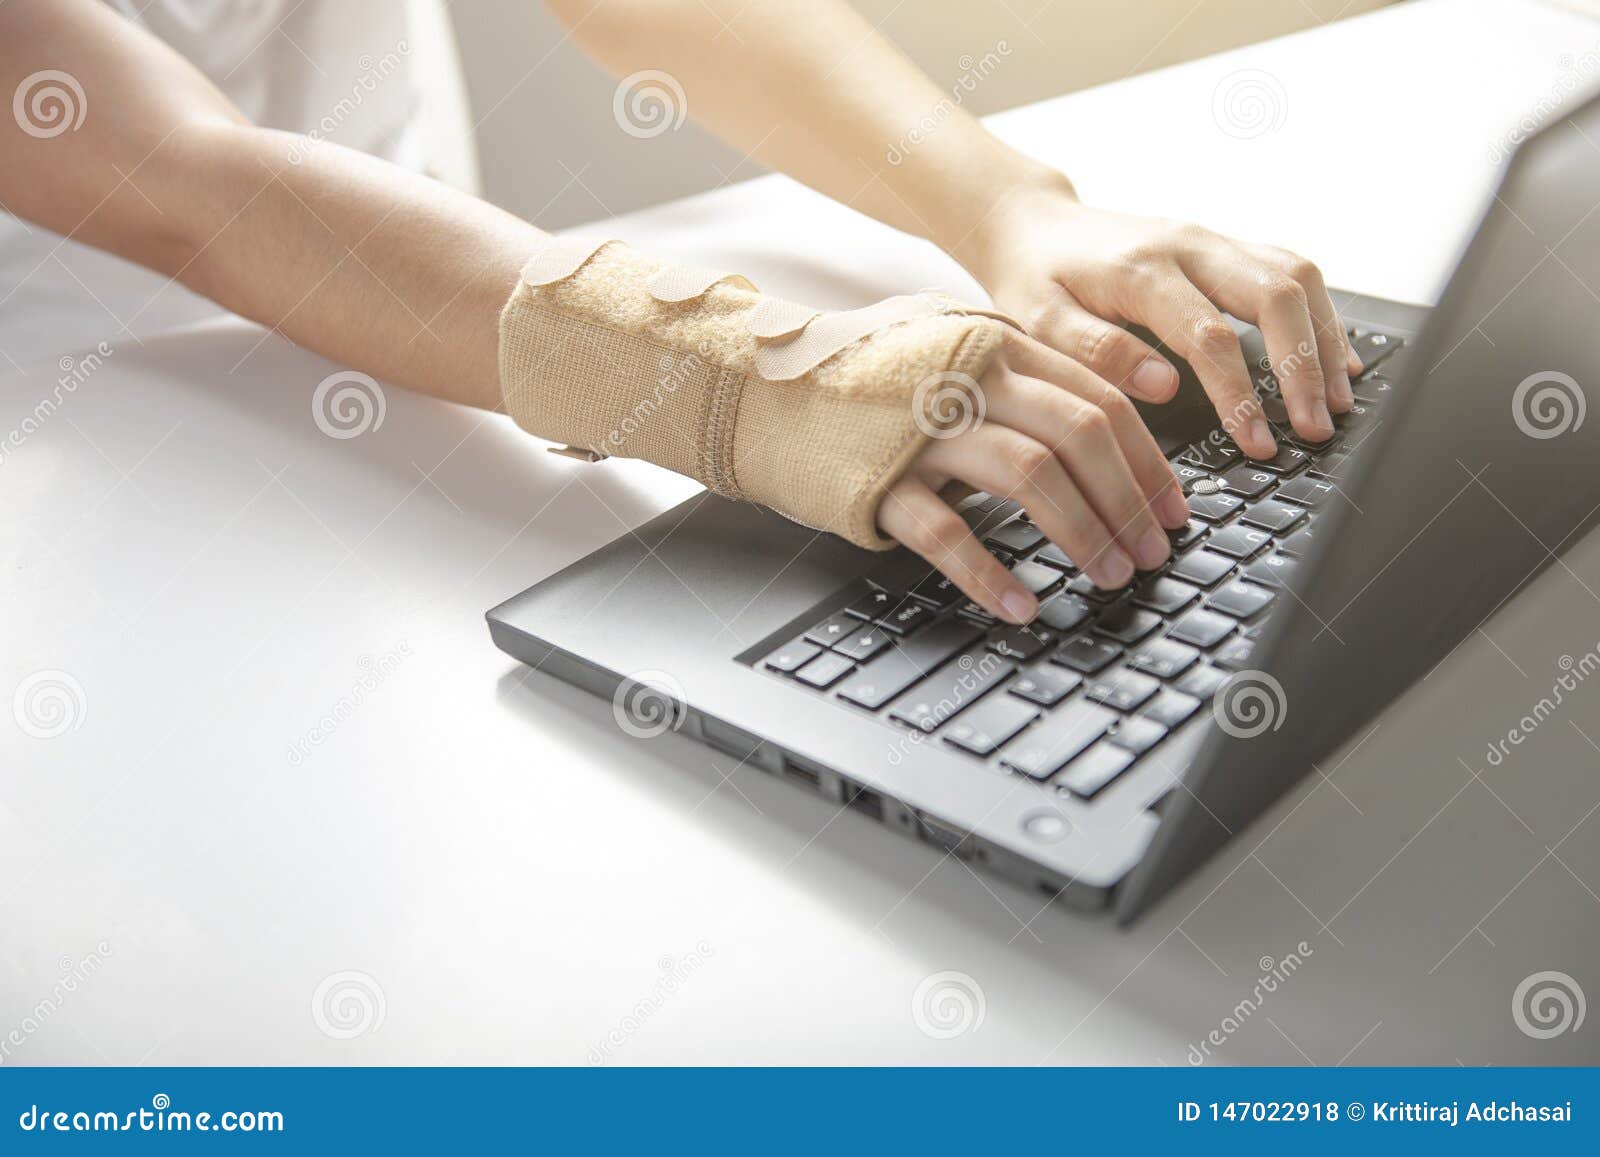 wrist pain from using computer, office syndrome hand pain or injury